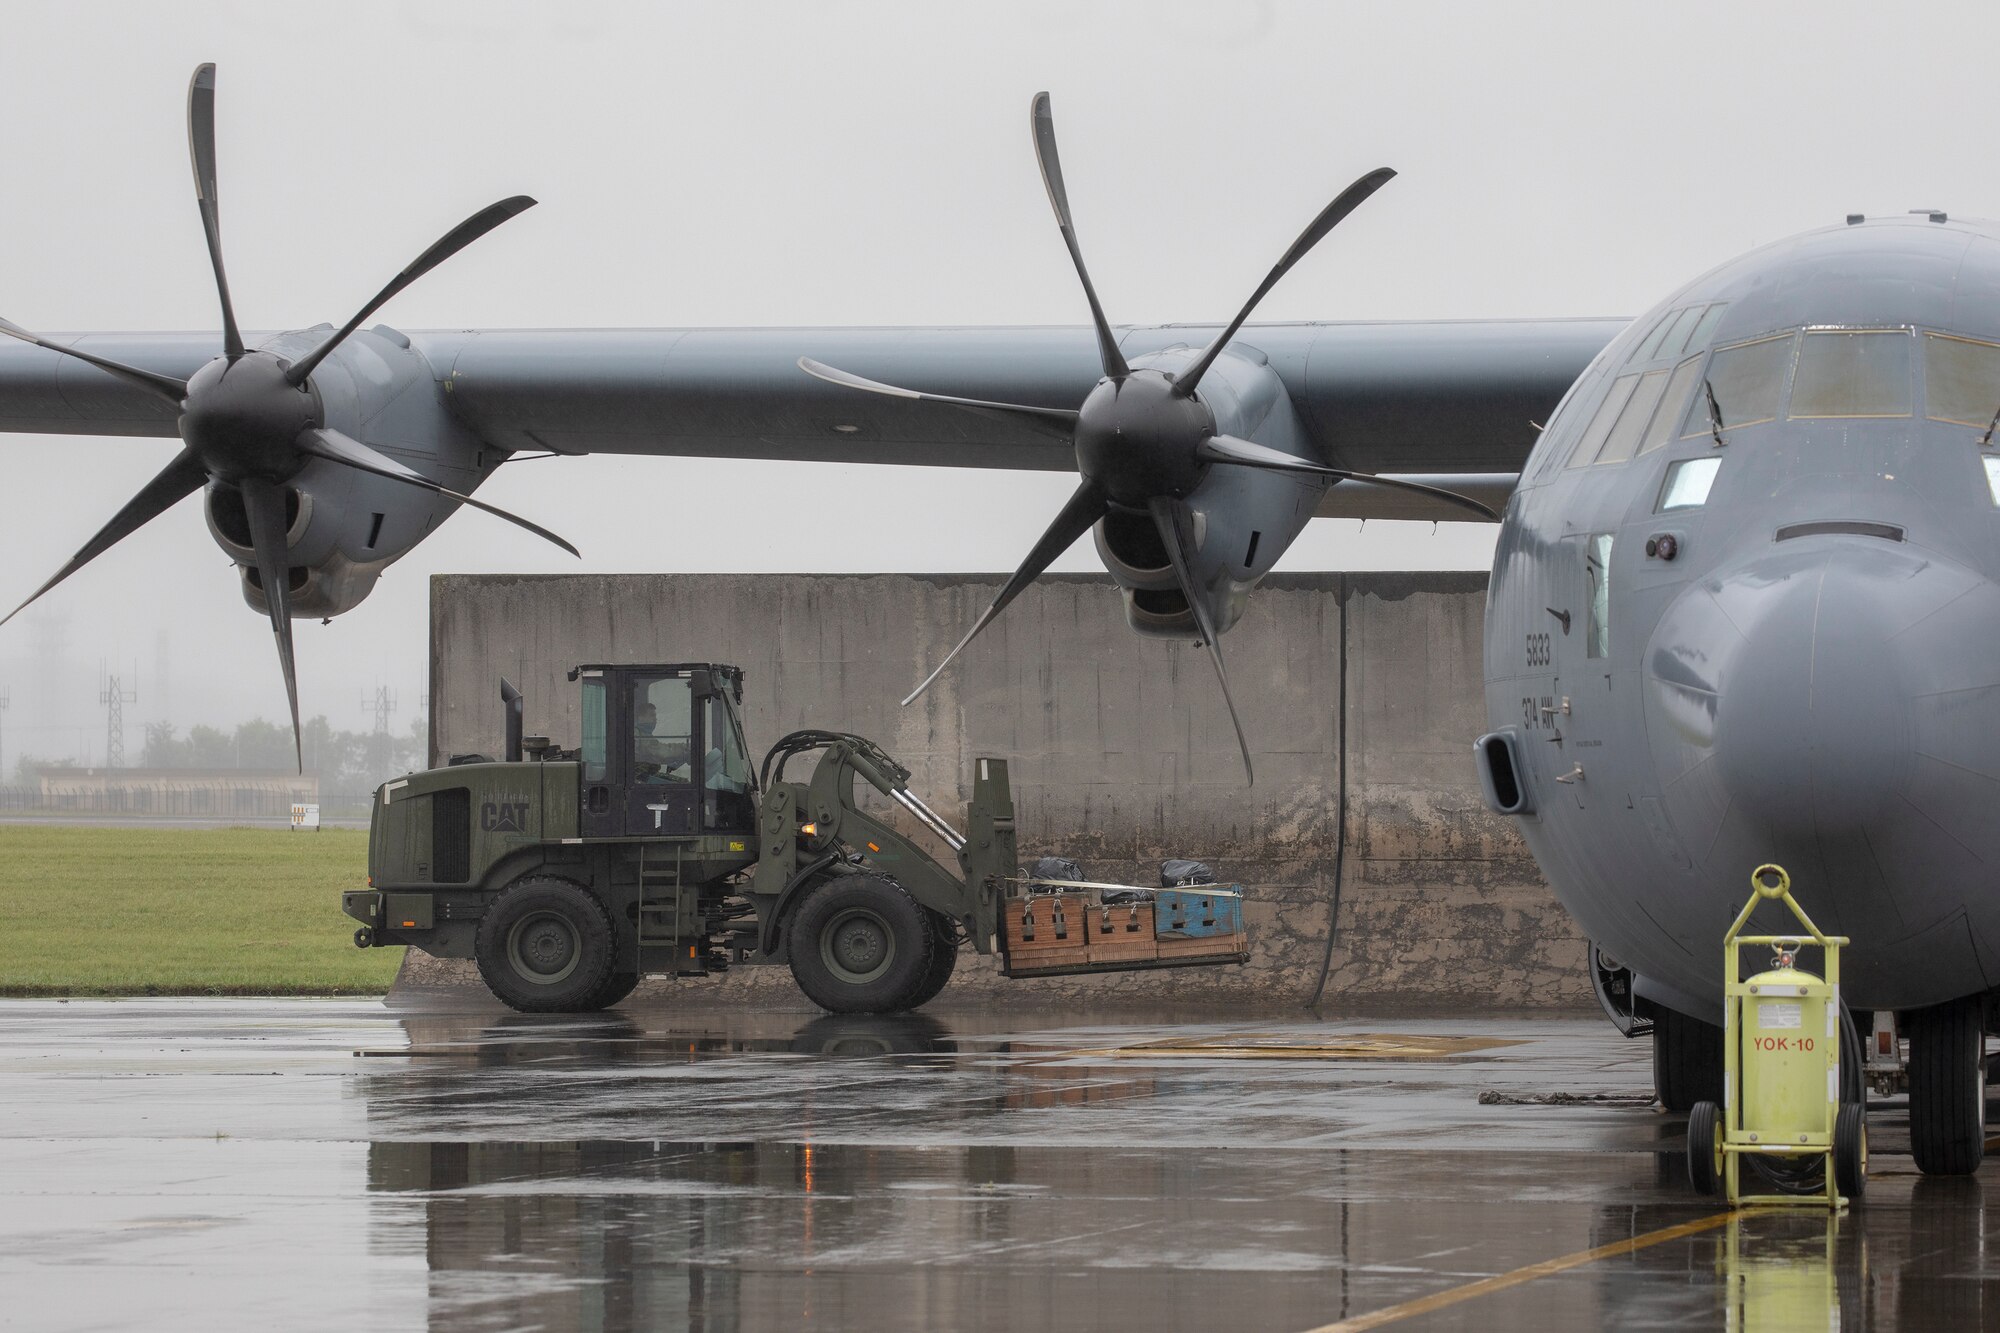 An Airman with the 374th Logistics Readiness Squadron combat mobility flight loads low-cost, low-altitude bundles with a forklift into a C-130J Super Hercules at Yokota Air Base, Japan, May 21, 2020, during the Samurai Surge training exercise.